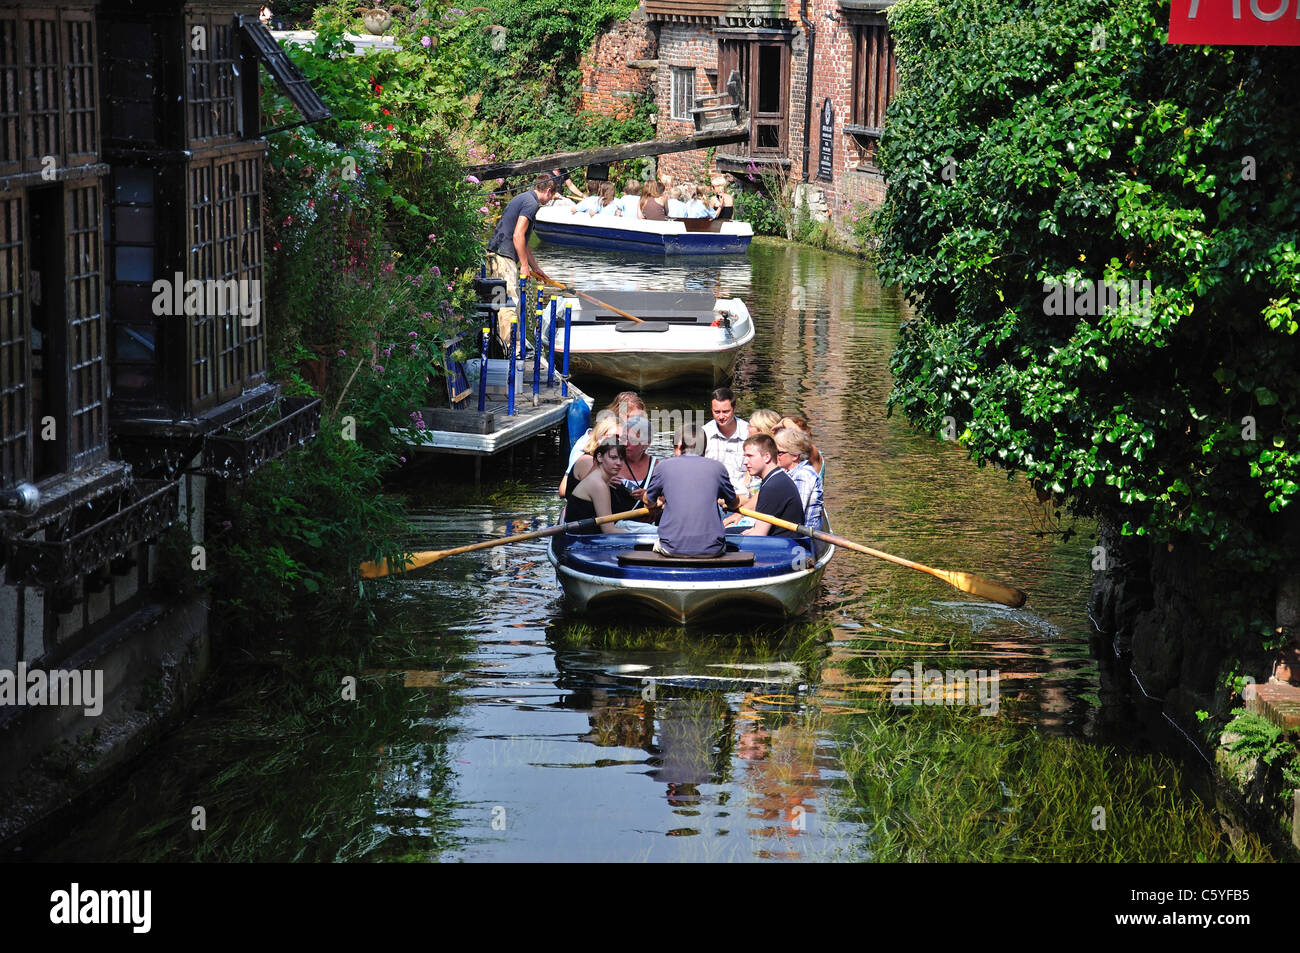 Punting on River Stour by Old Weaver's Restaurant, Canterbury, City of Canterbury, Kent, England, United Kingdom Stock Photo